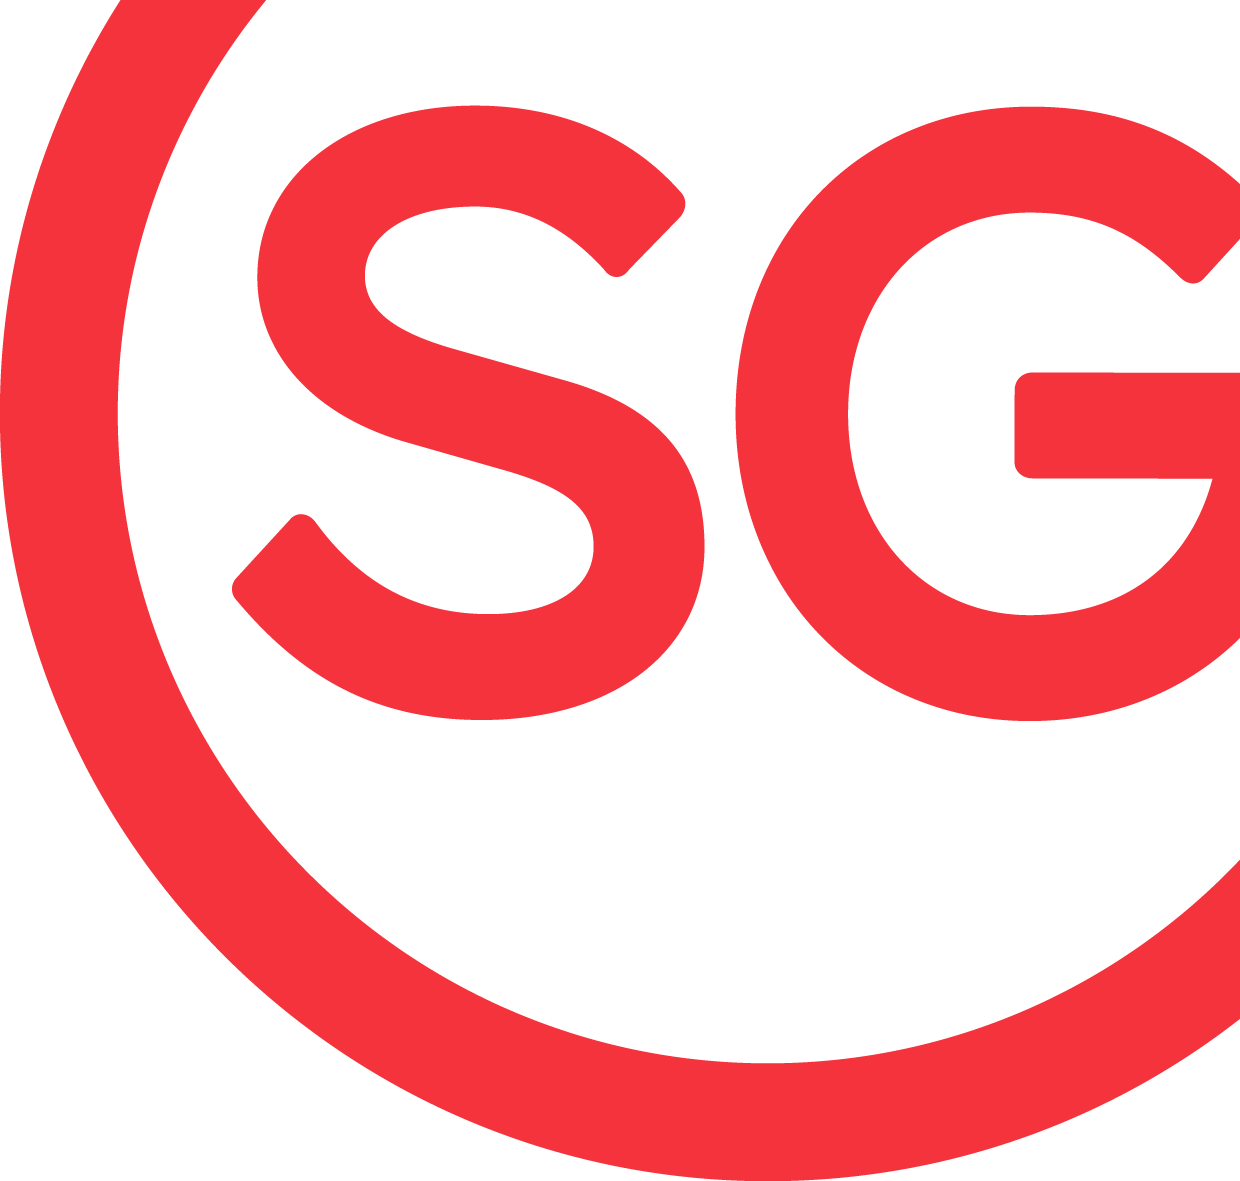 S G Logo - STB-owned - Logos